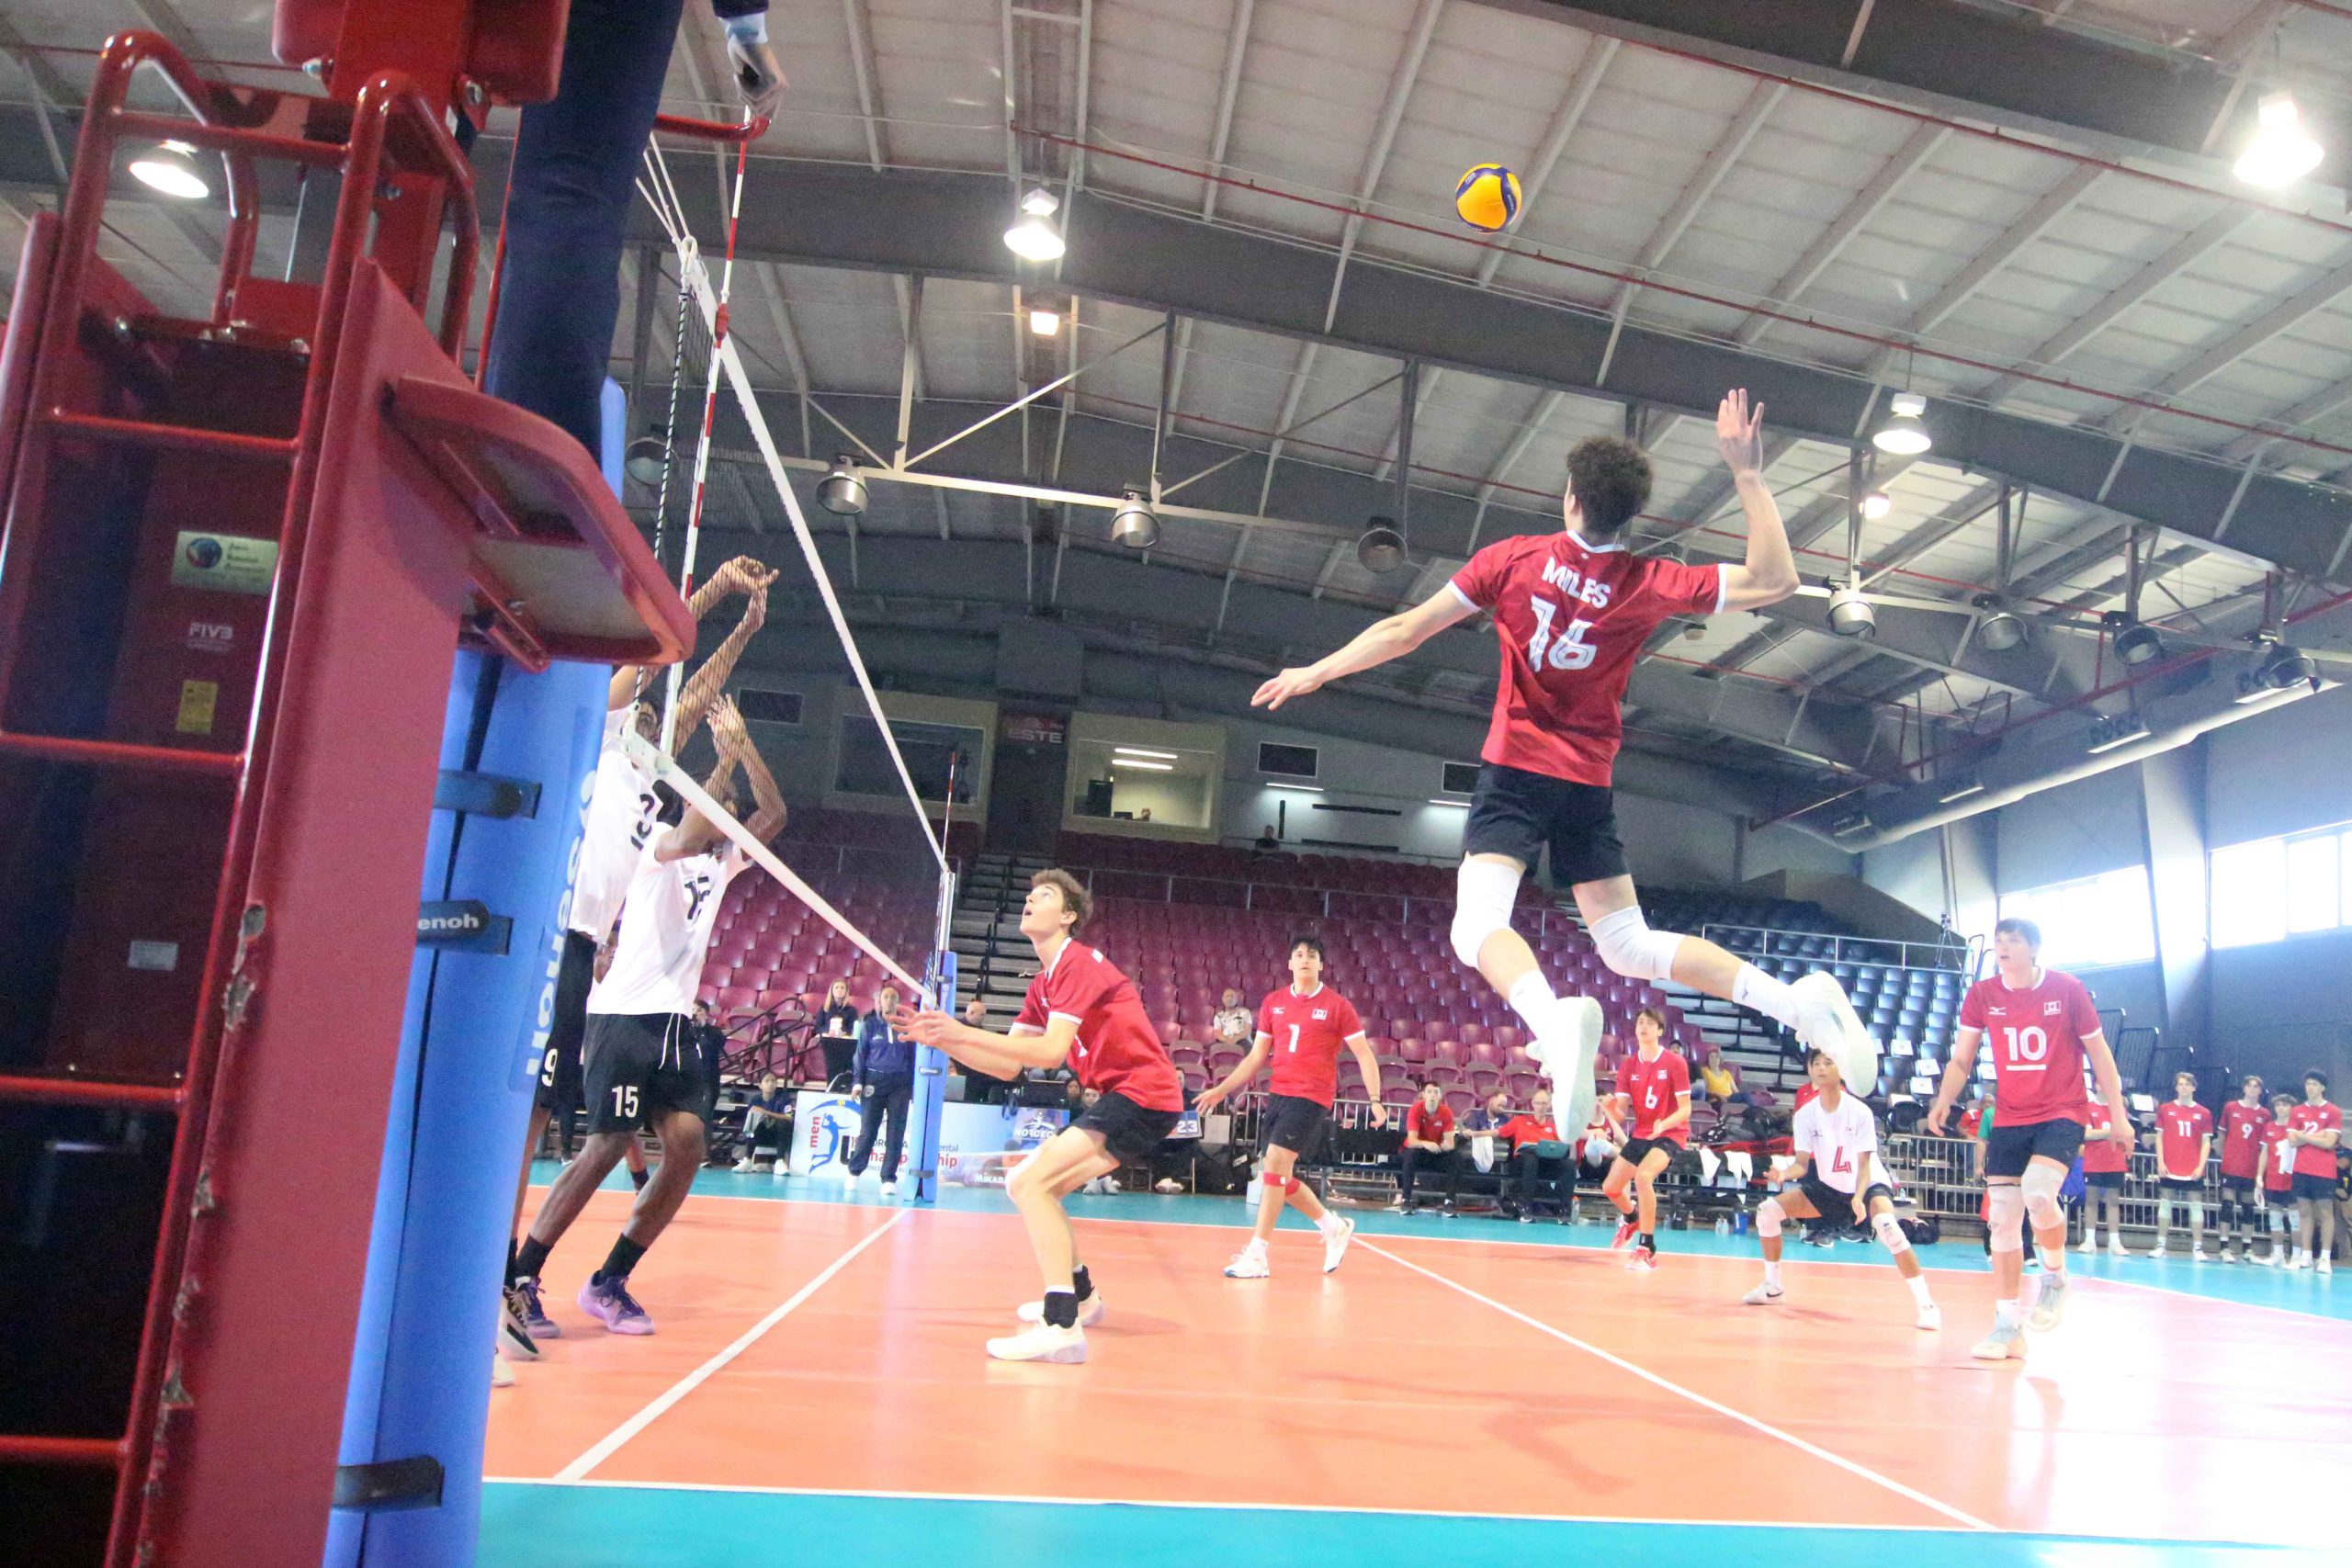 Canada Advances to Quarterfinals with Victory over Suriname